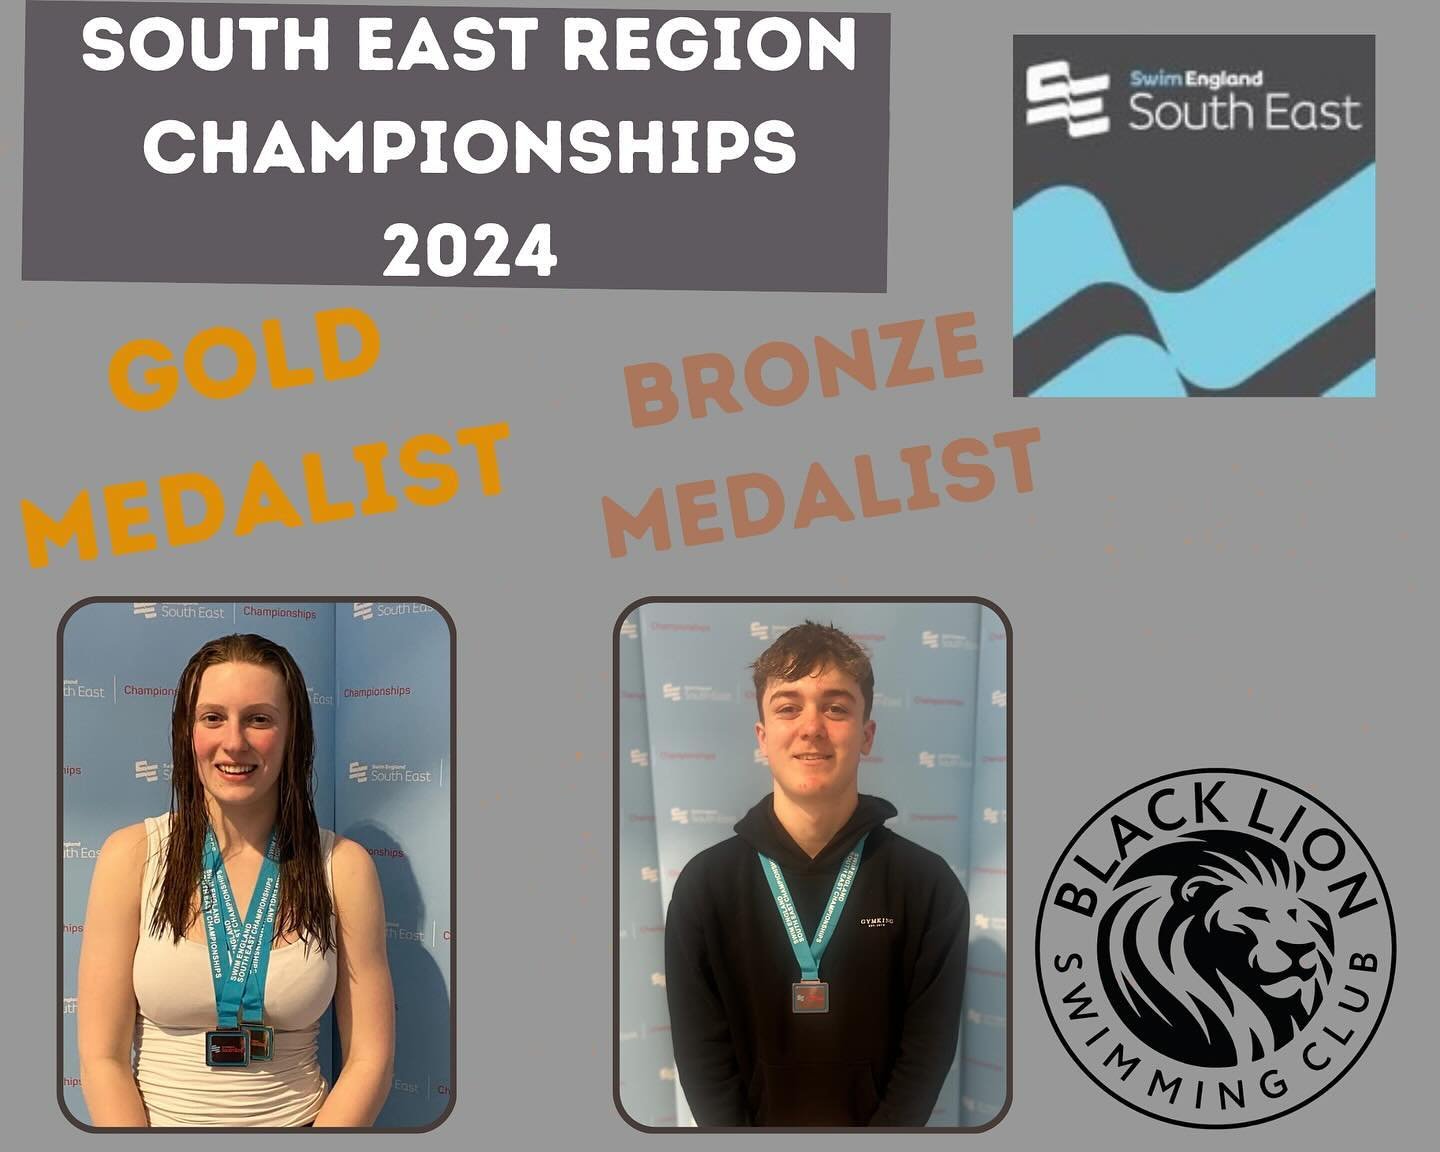 Another great day of swimming saw Mia win Gold 🥇 for the 100m backstroke and bronze 🥉 for the 200im 
George took the bronze 🥉 for the 50fly 
Massive well done to you both 👏🦁🏊🏻&zwj;♀️🏊🏻&zwj;♂️
#competitiveswimming #RuleThePool #fastswimming #